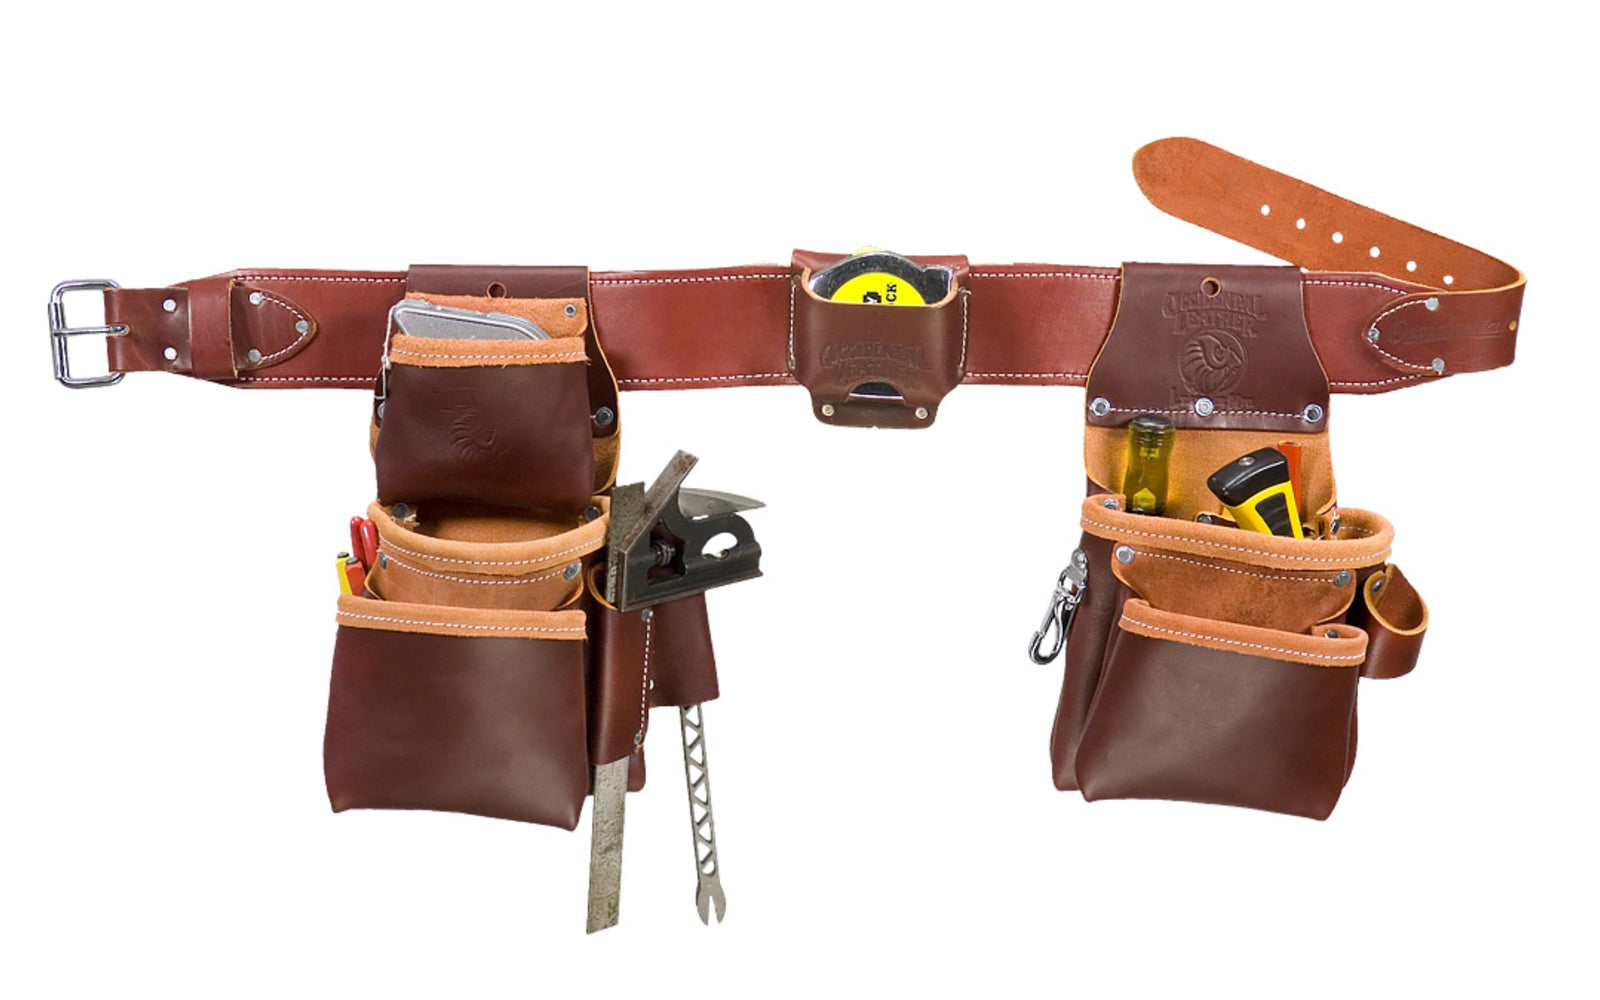 Occidental Leather "Pro Trimmer" Tool Belt Set Package ~ 6100T LG - Large Belt Size (3" Large Ranger Work Belt) - Premium Top-Grain Leather - 18 Pockets & Tool Holders ~ Pro Leather series is made of top grain cow hides tanned with oils & waxes for heavy use. Tool & fastener organization for efficiency ~ Occidental 6100T LG